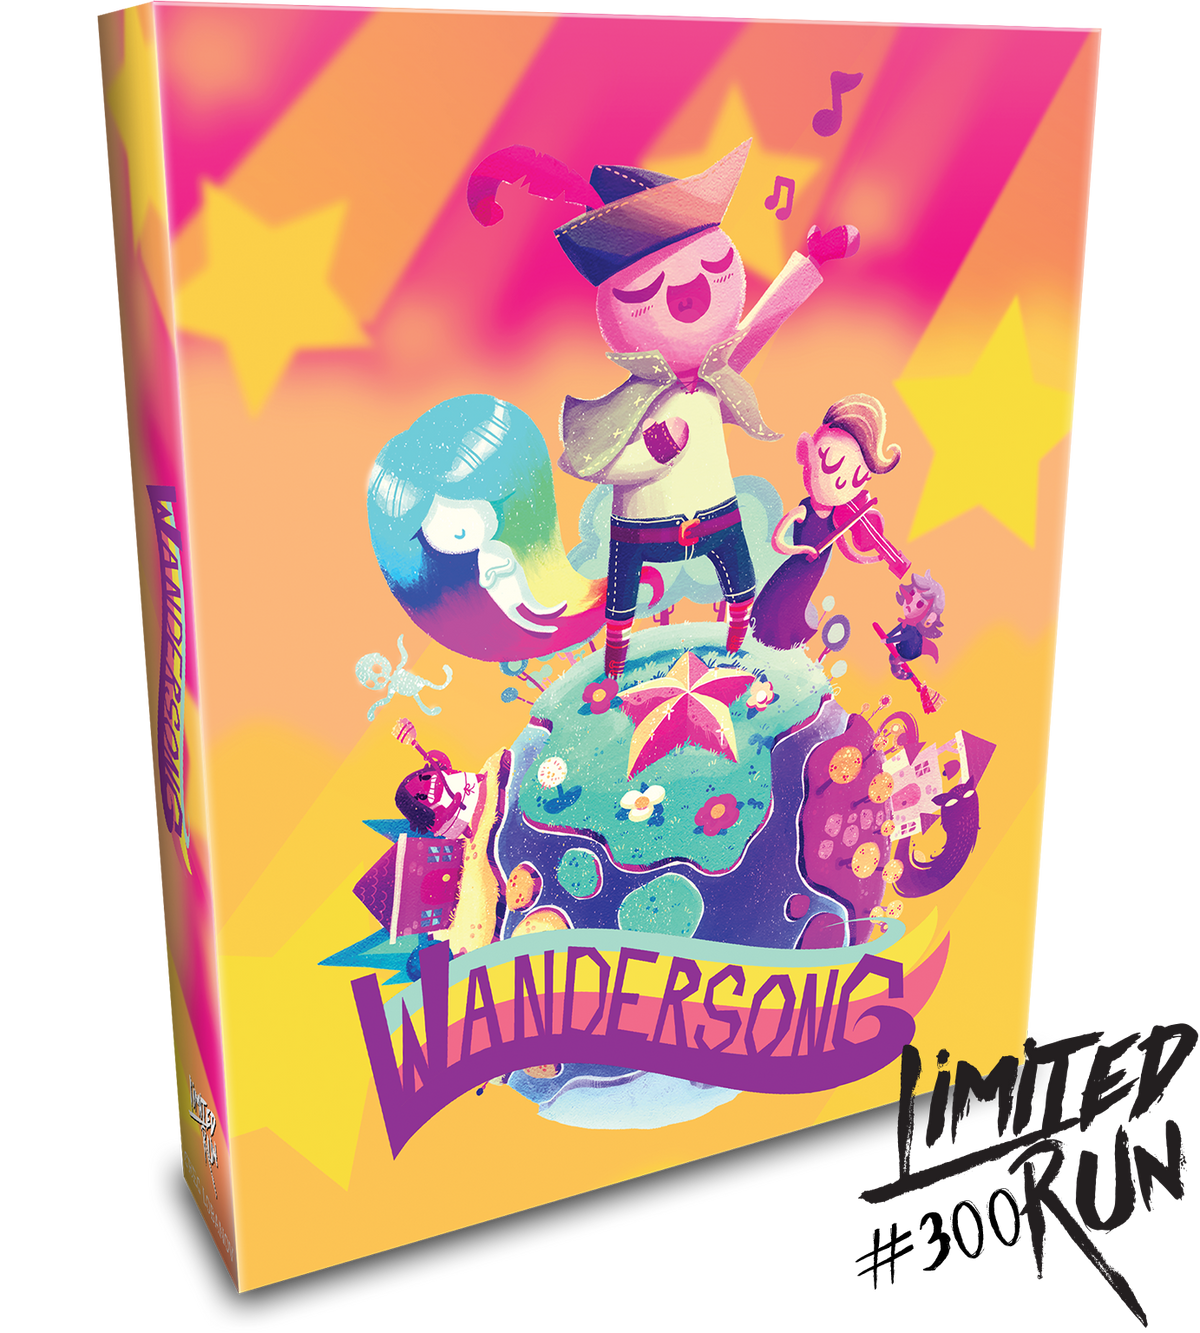 Limited Run #300: Wandersong Pop-up Edition (PS4)